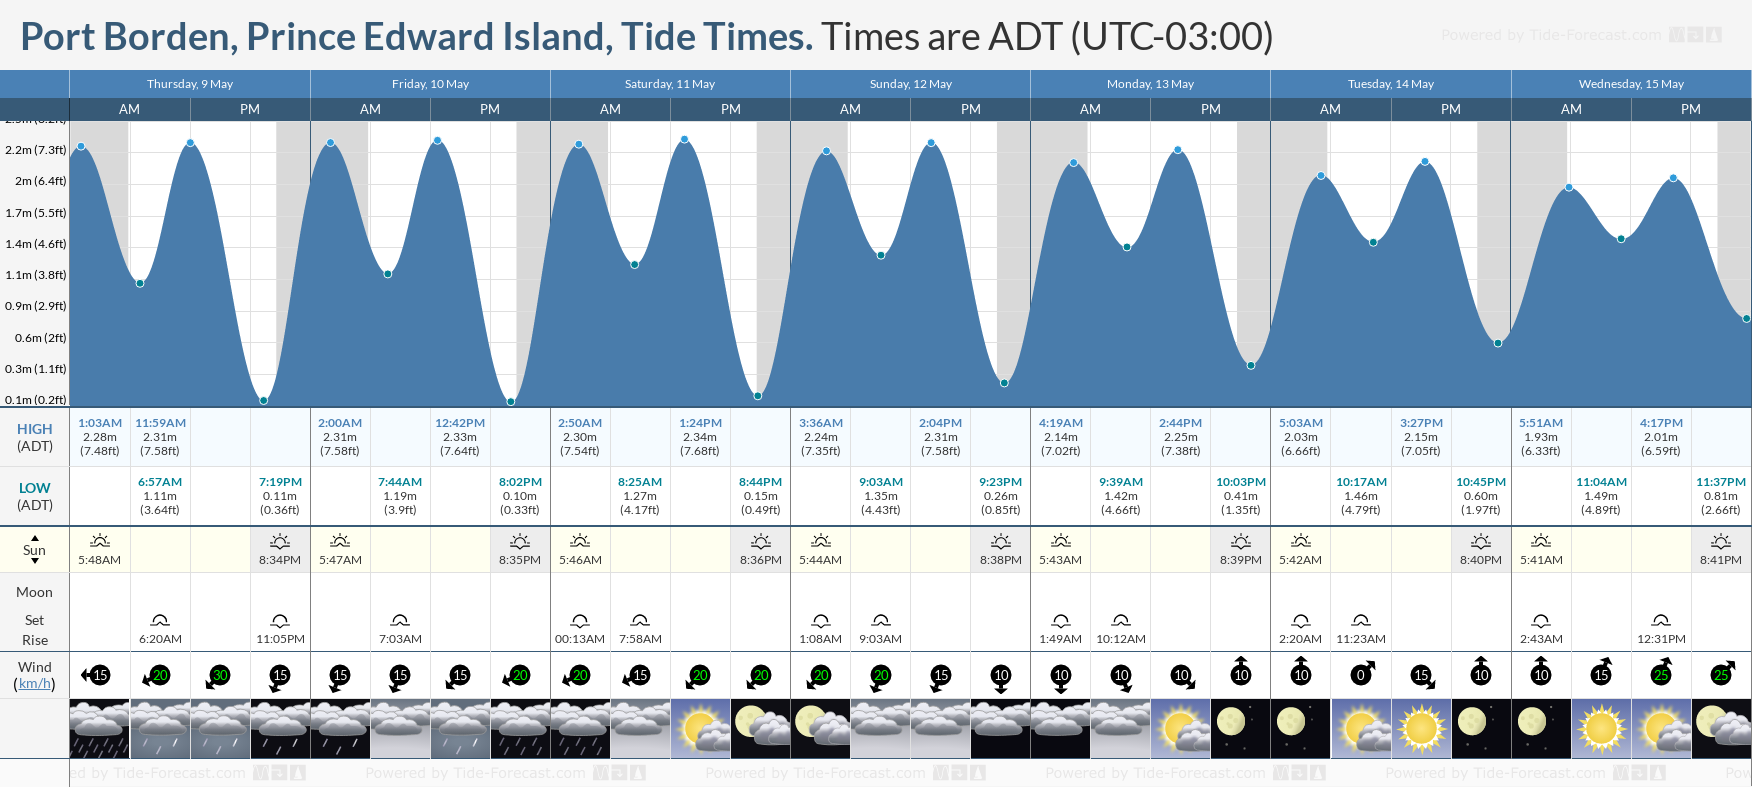 Port Borden, Prince Edward Island Tide Chart including high and low tide tide times for the next 7 days